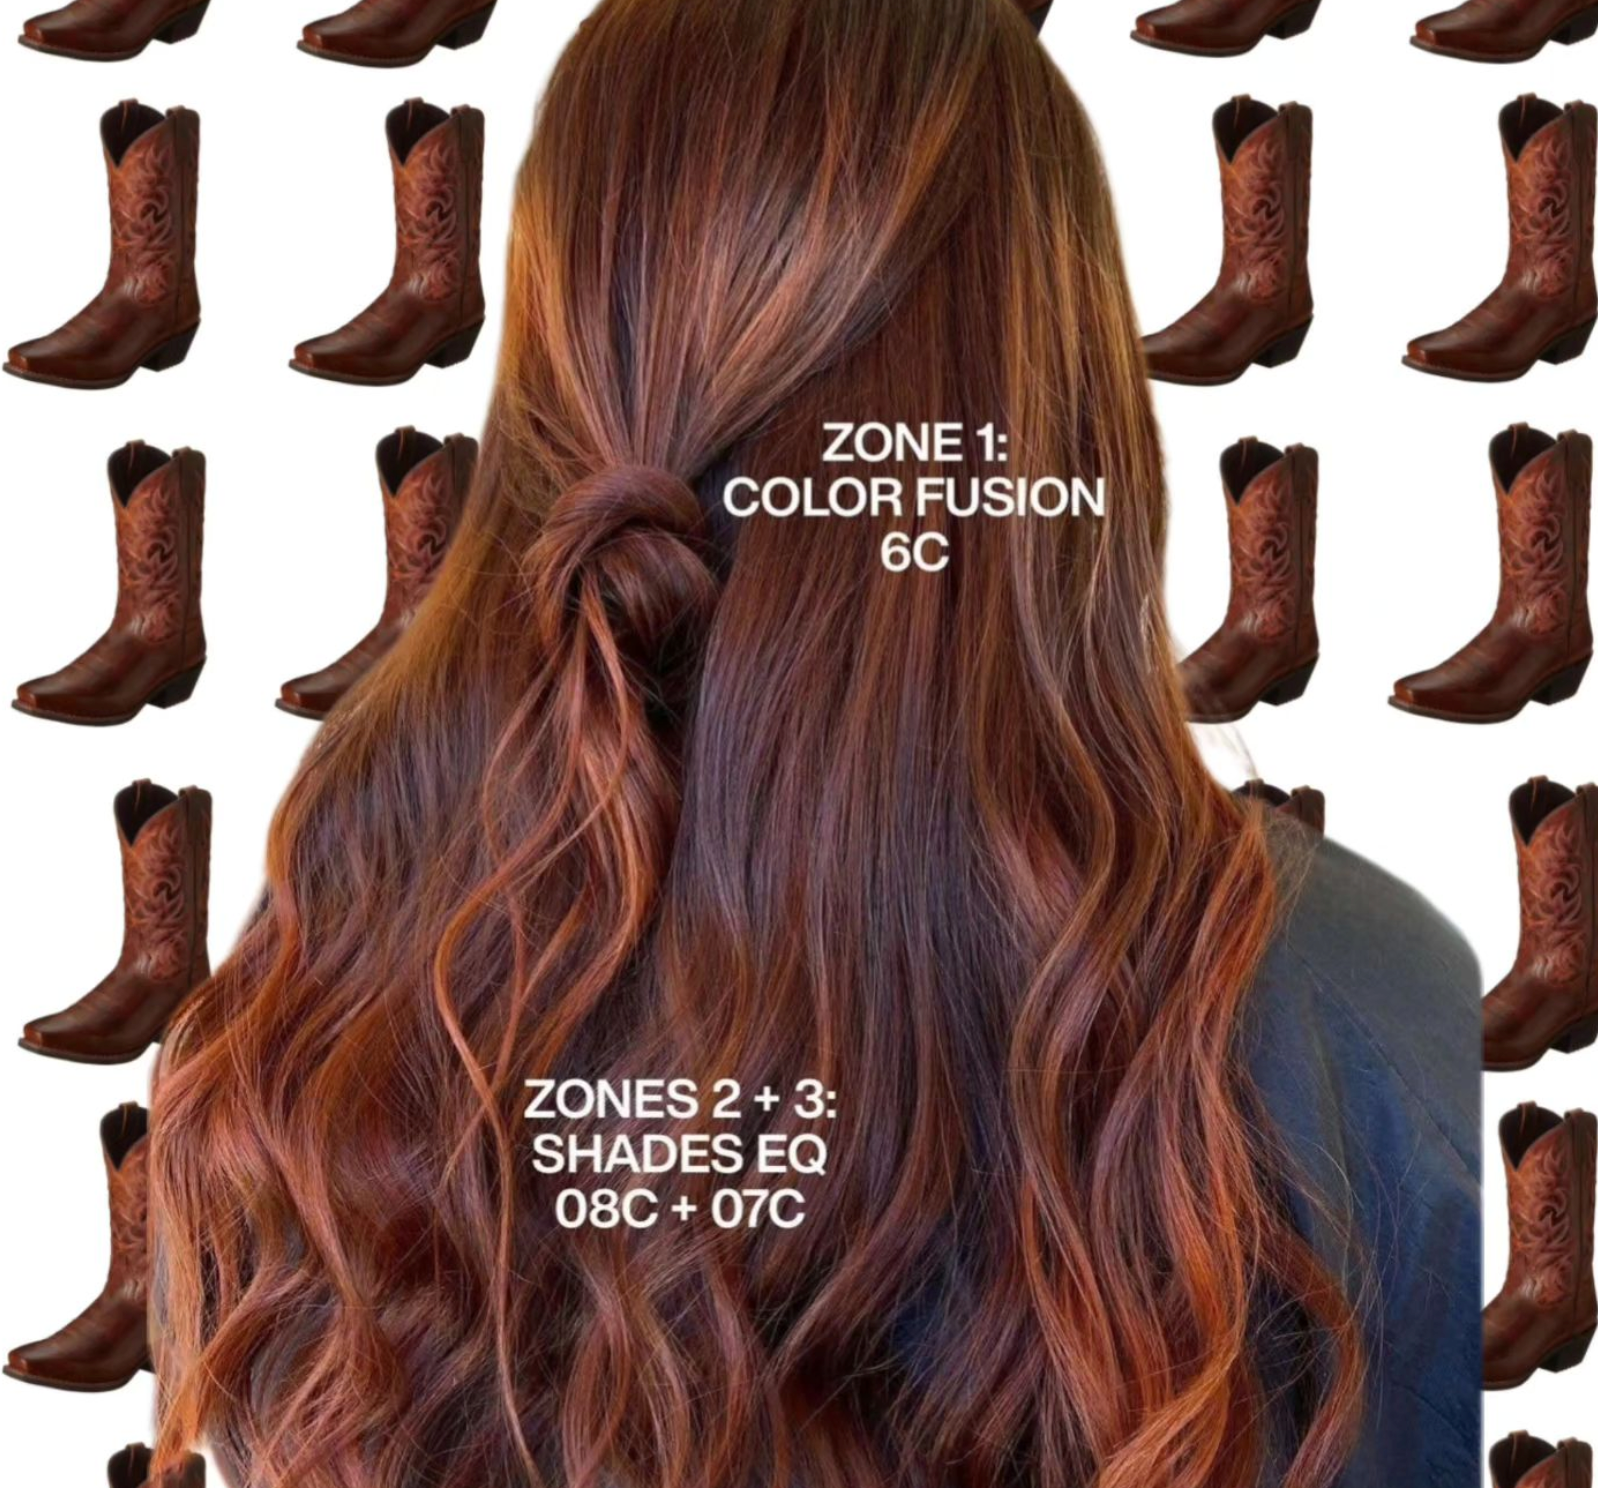 Cowgirl Copper: Formulas to achieve this trending hair color